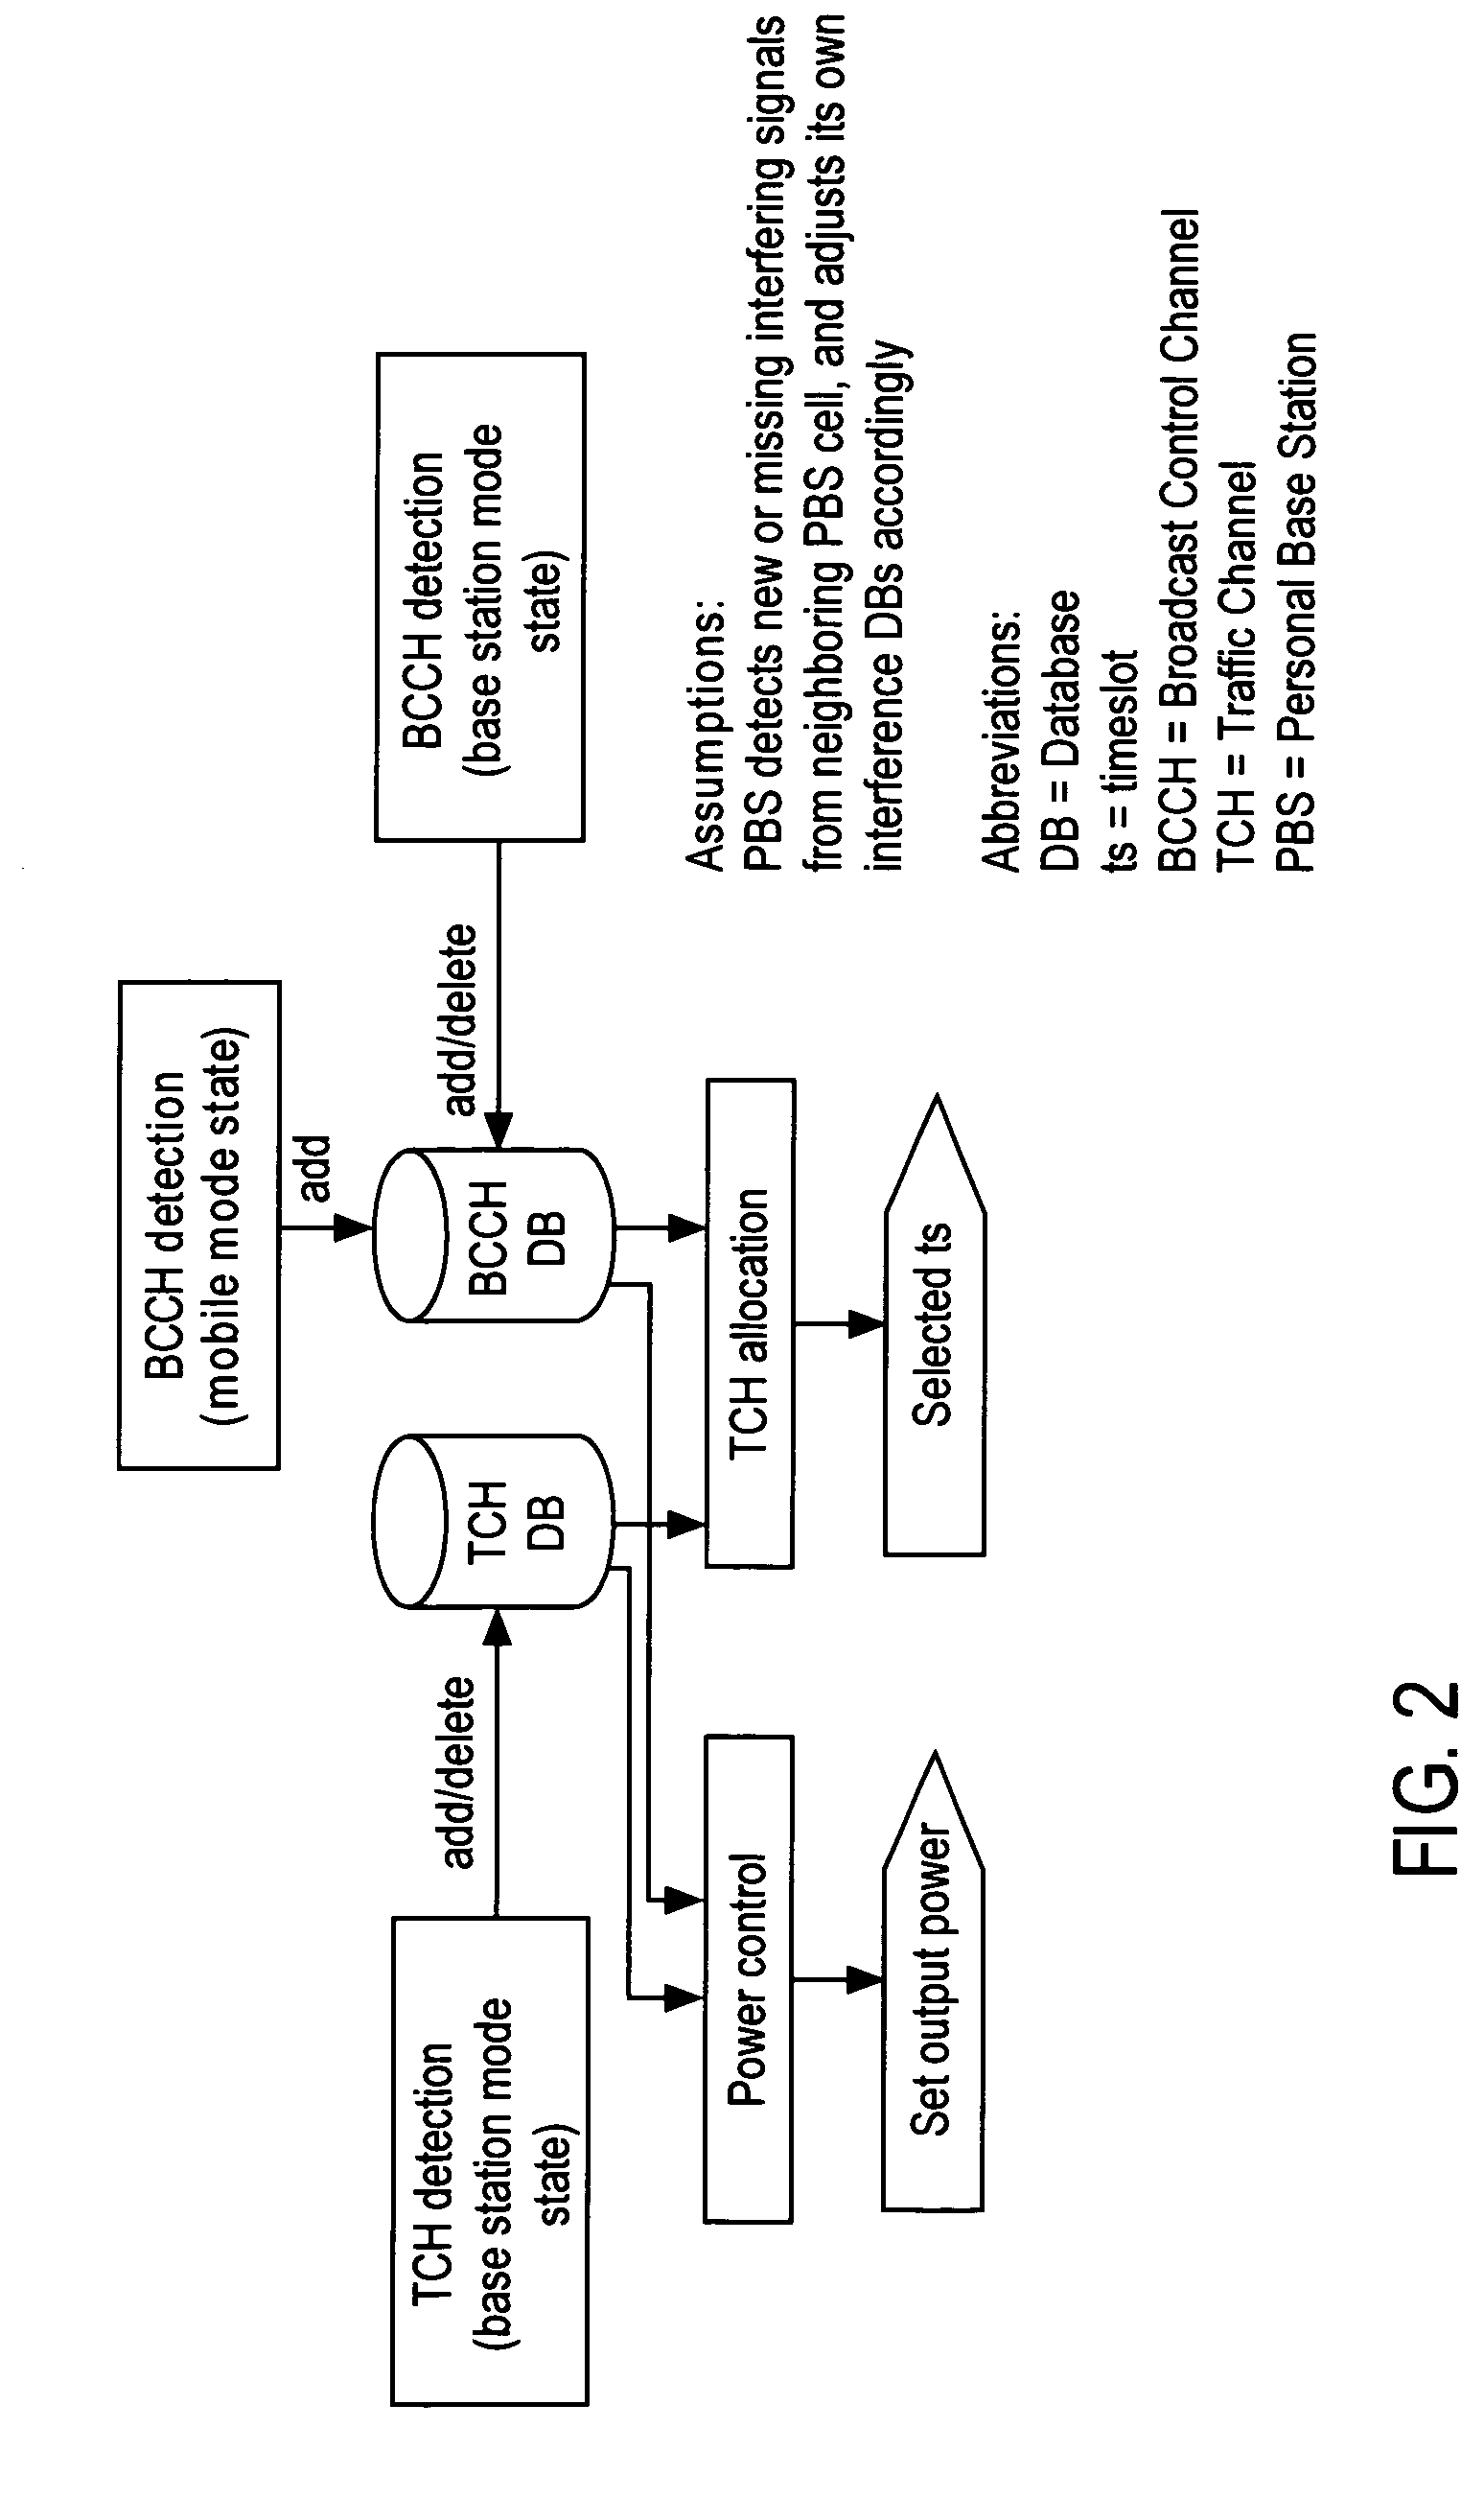 Base station interference control using timeslot resource management